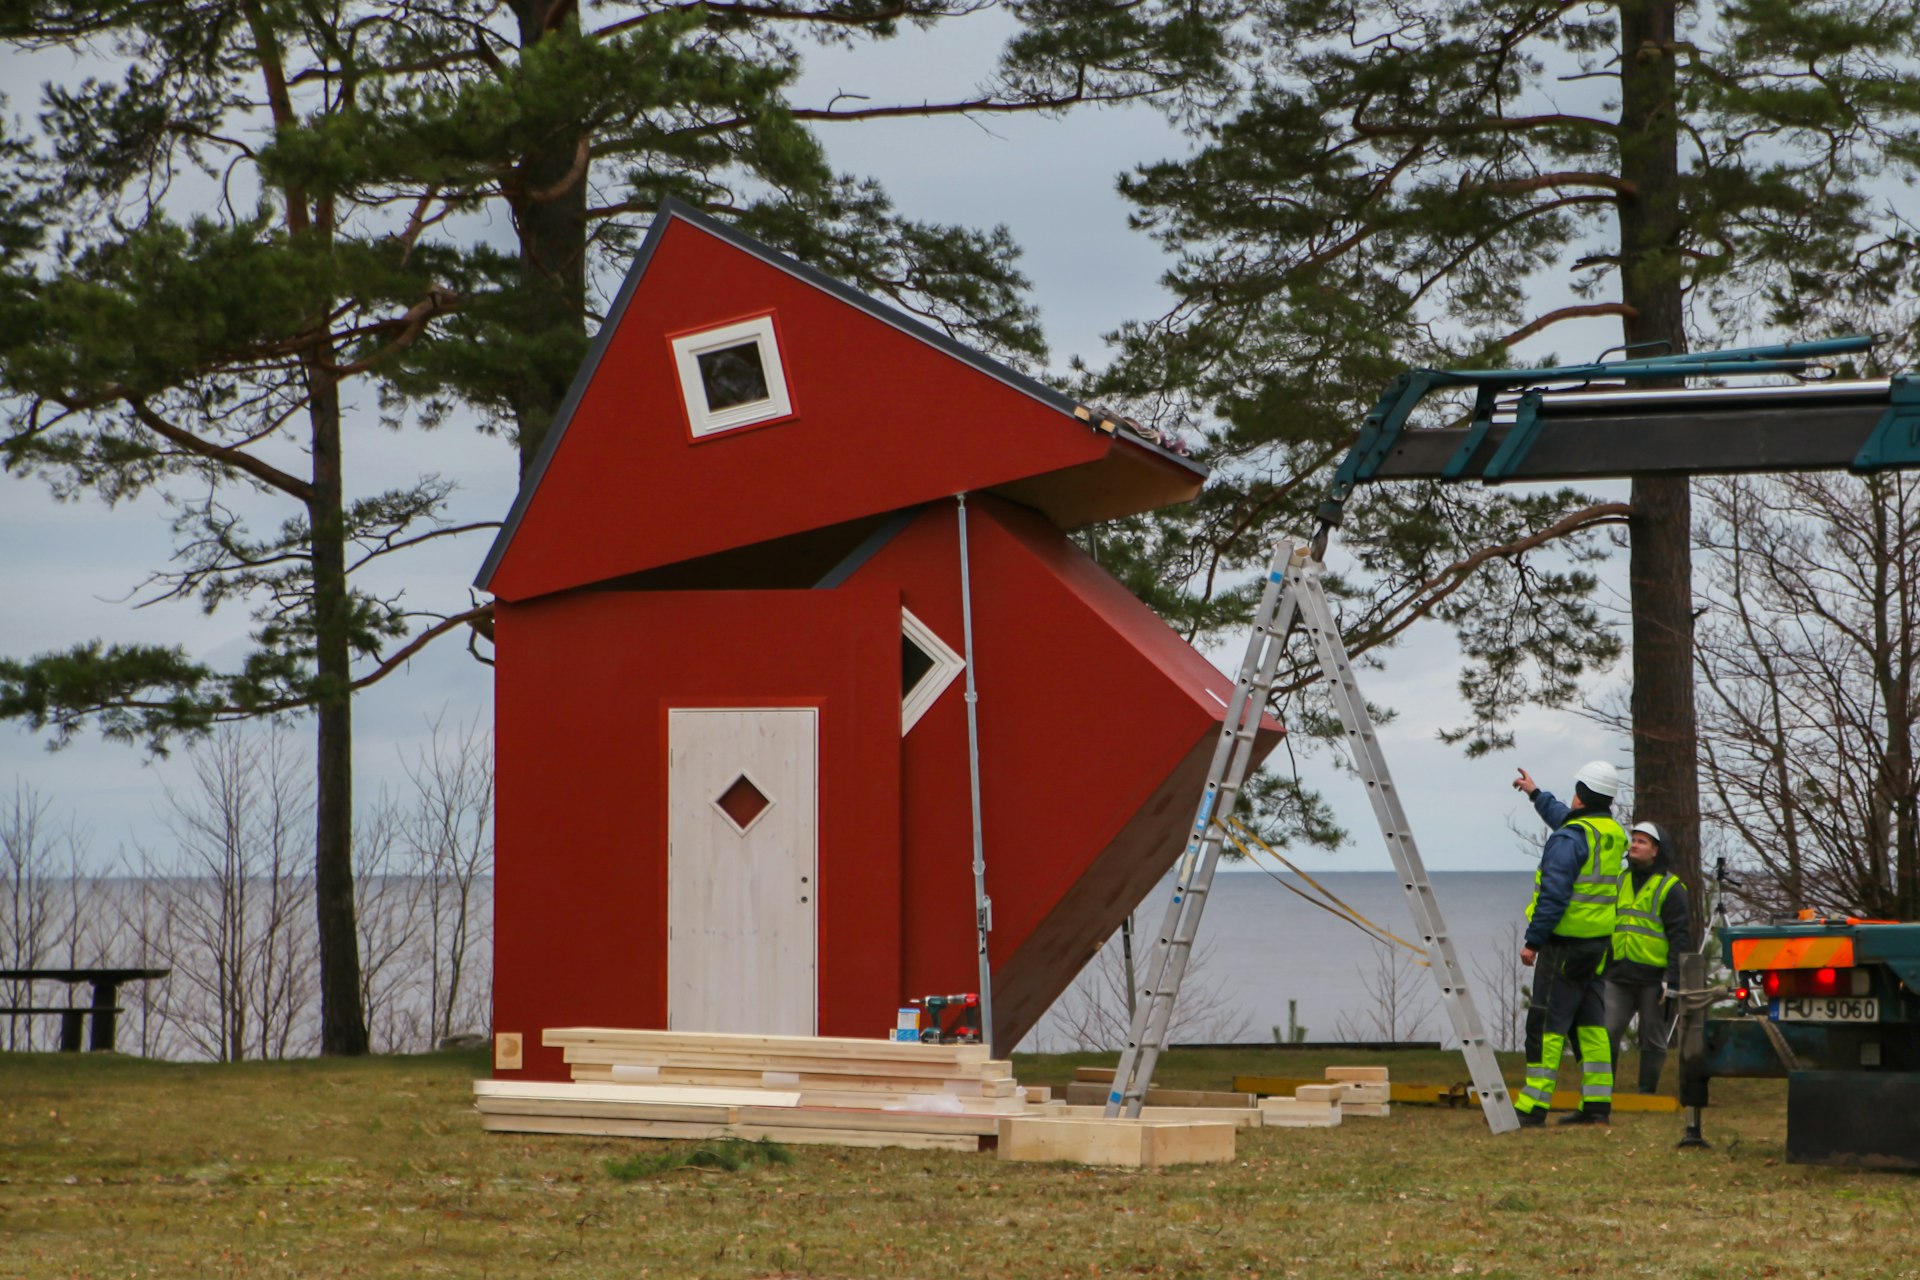 A picture of the tiny house in the process of unfolding